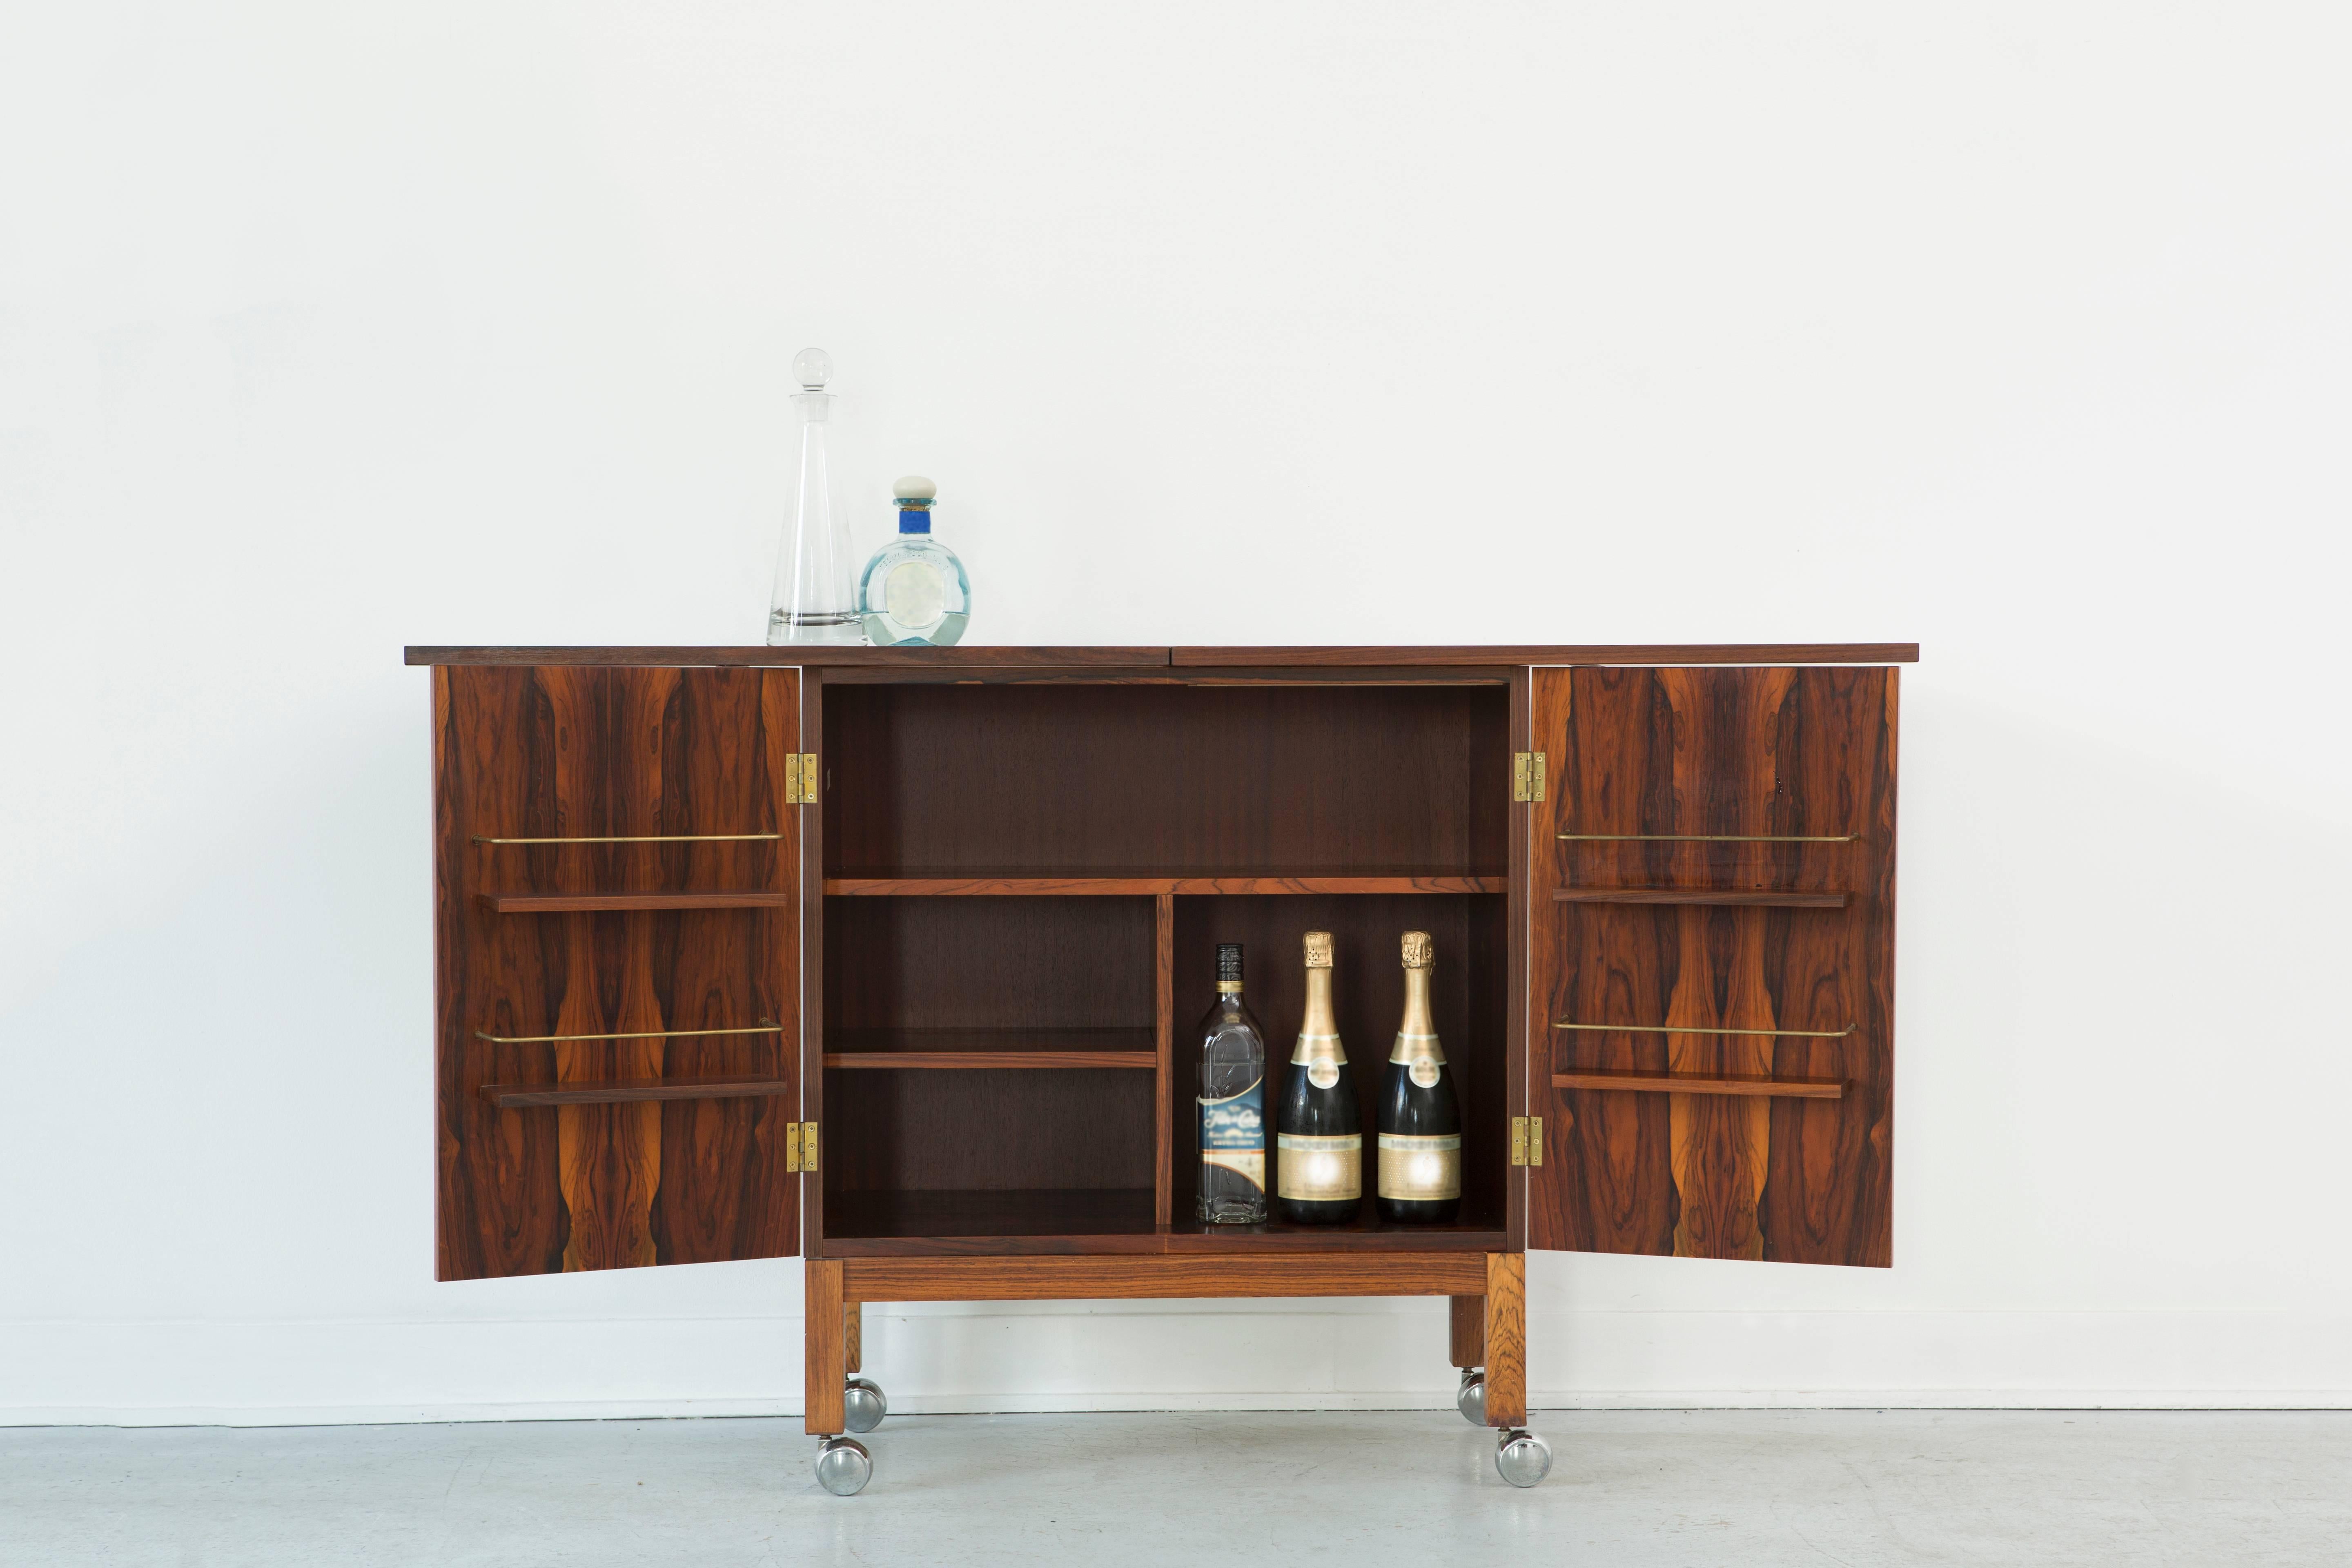 Flip top dry bar designed by Torbjørn Adfal for Bruskbo

Norway, circa 1960s.

Rosewood

This dry bar on rolling casters is lockable with a variety of options for storing your alcohol and glassware 

Torbjørn Afdal is considered one of Norway's most